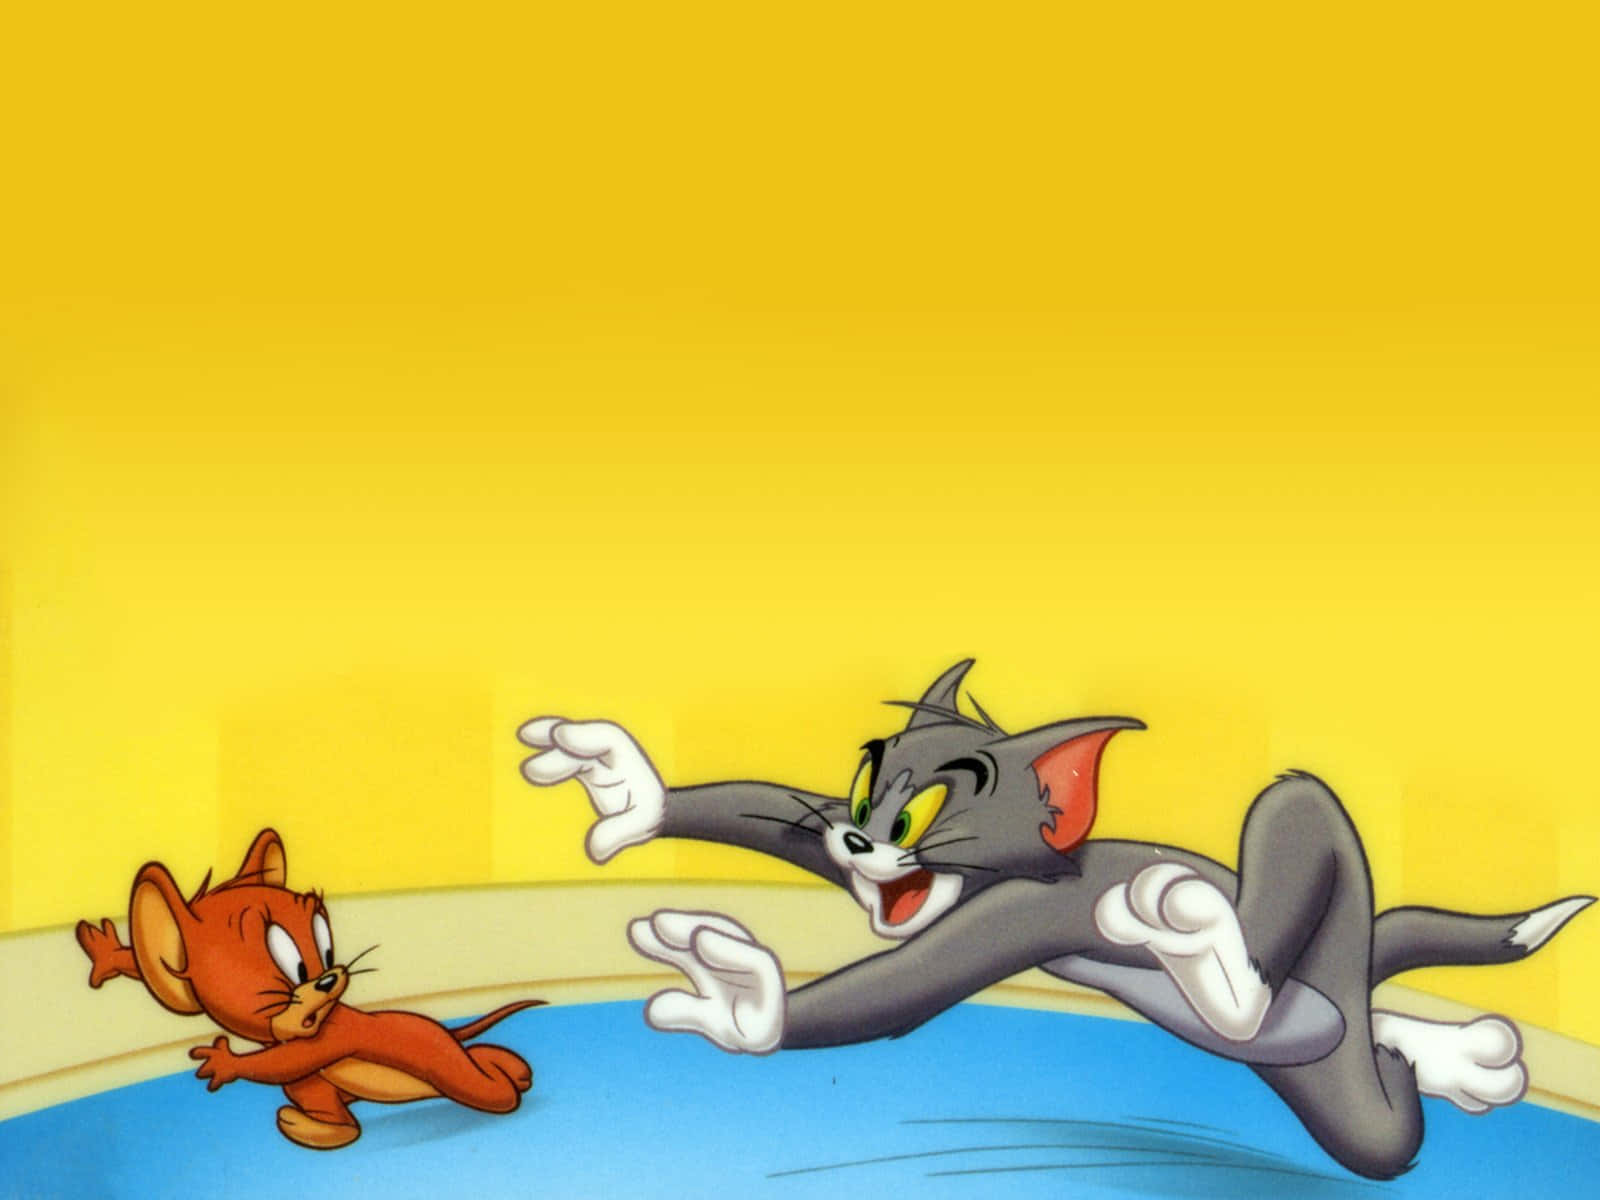 Tom and Jerry having a joyride Wallpaper